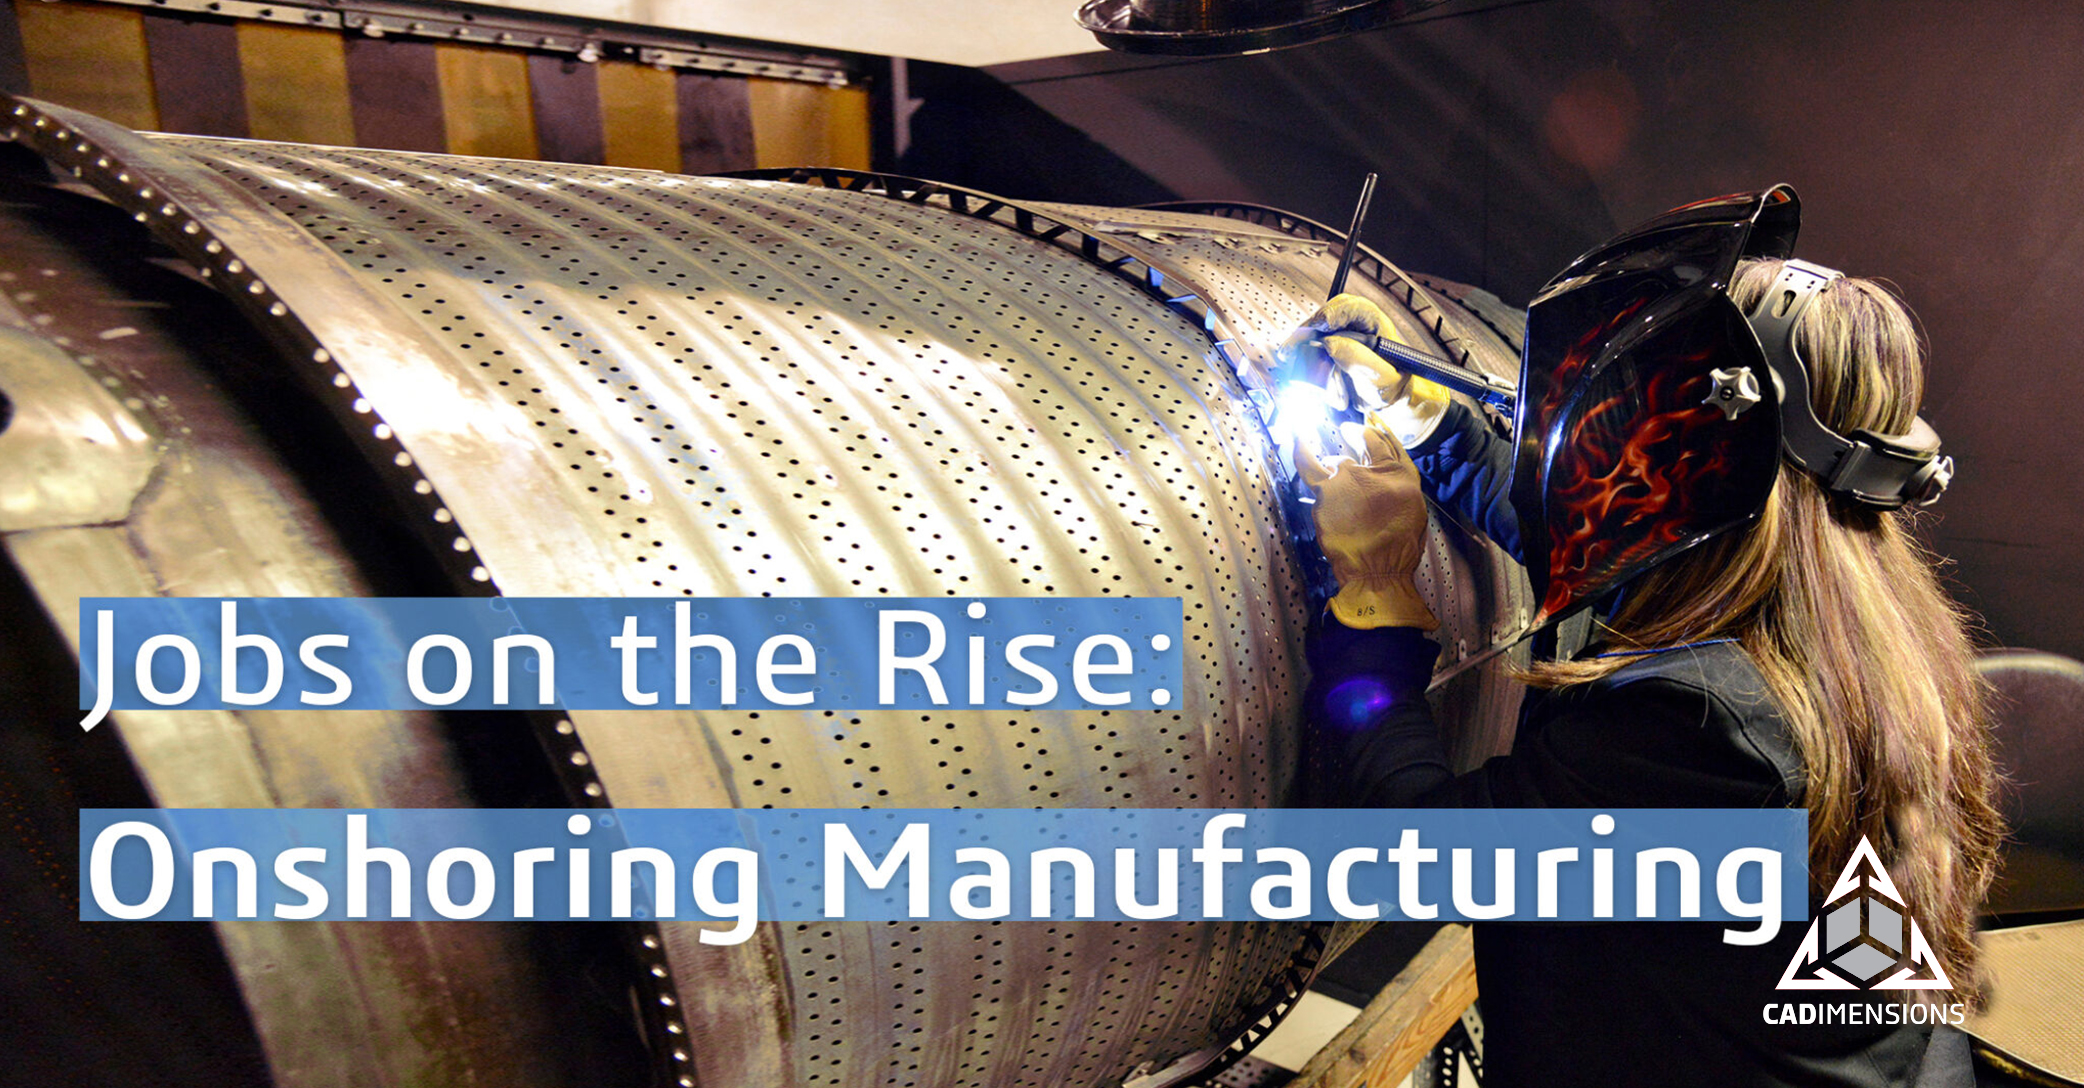 American Manufacturing Jobs on the Rise